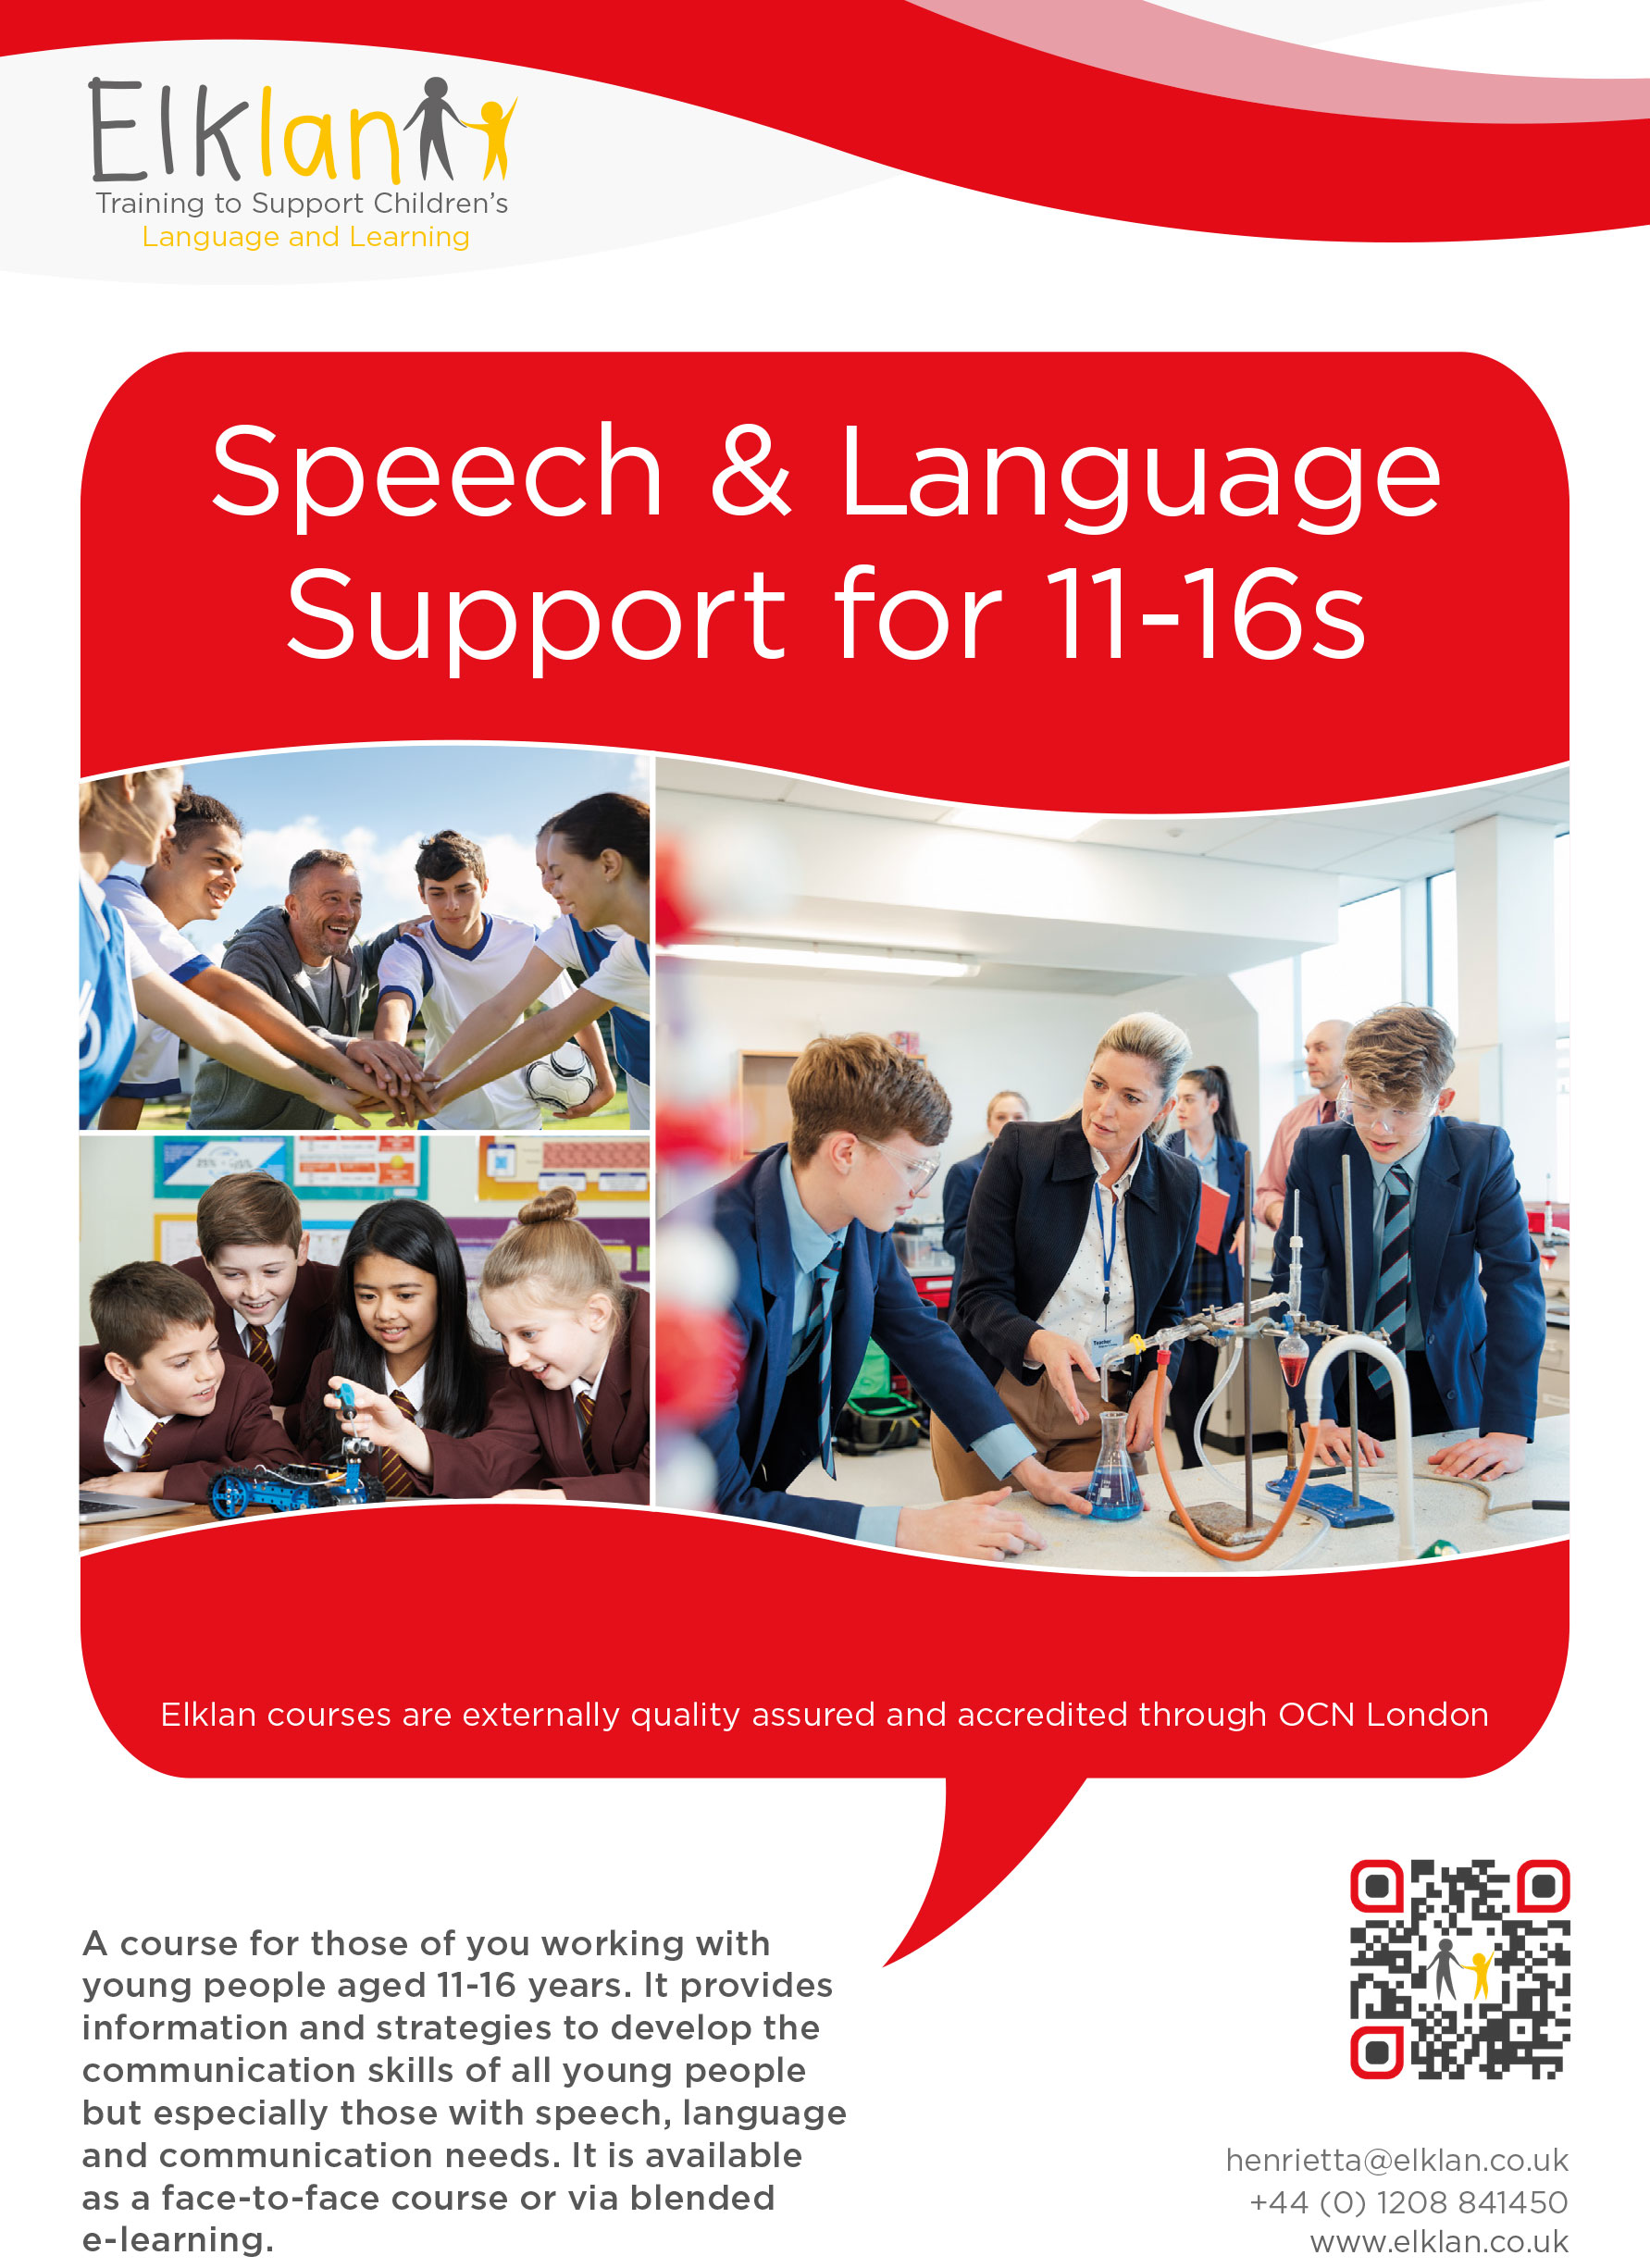 Speech and Language Support for 11-16s flyer - 100 copies